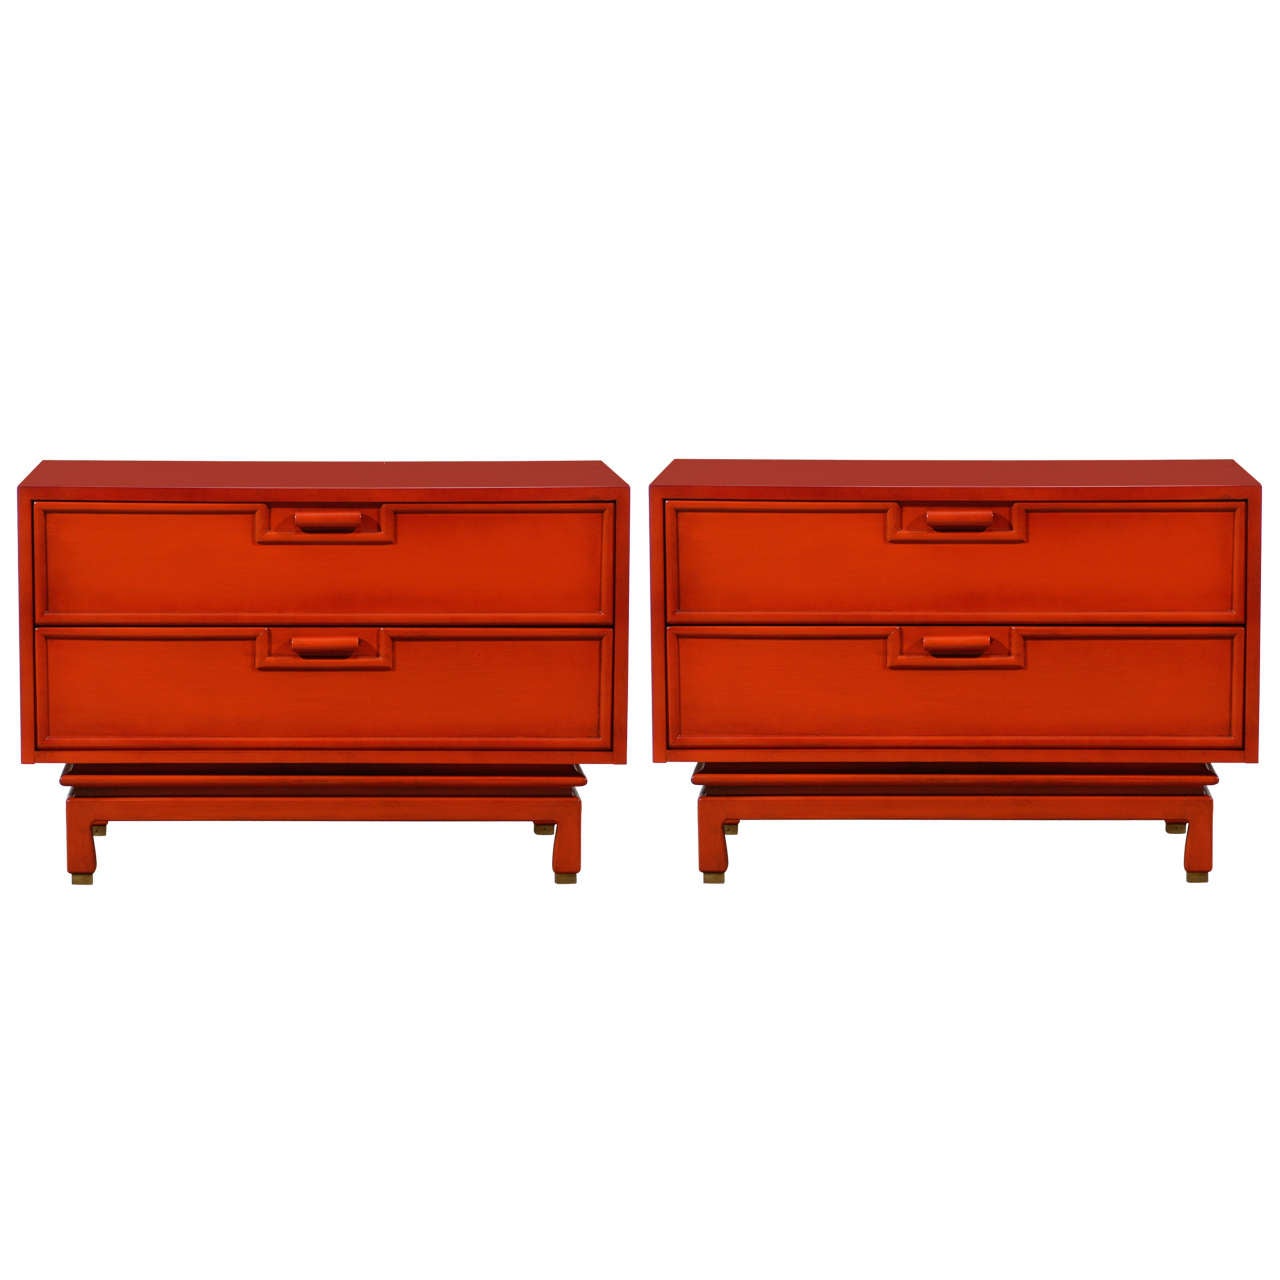 Striking Pair of End Tables/ Night Stands by American of Martinsville